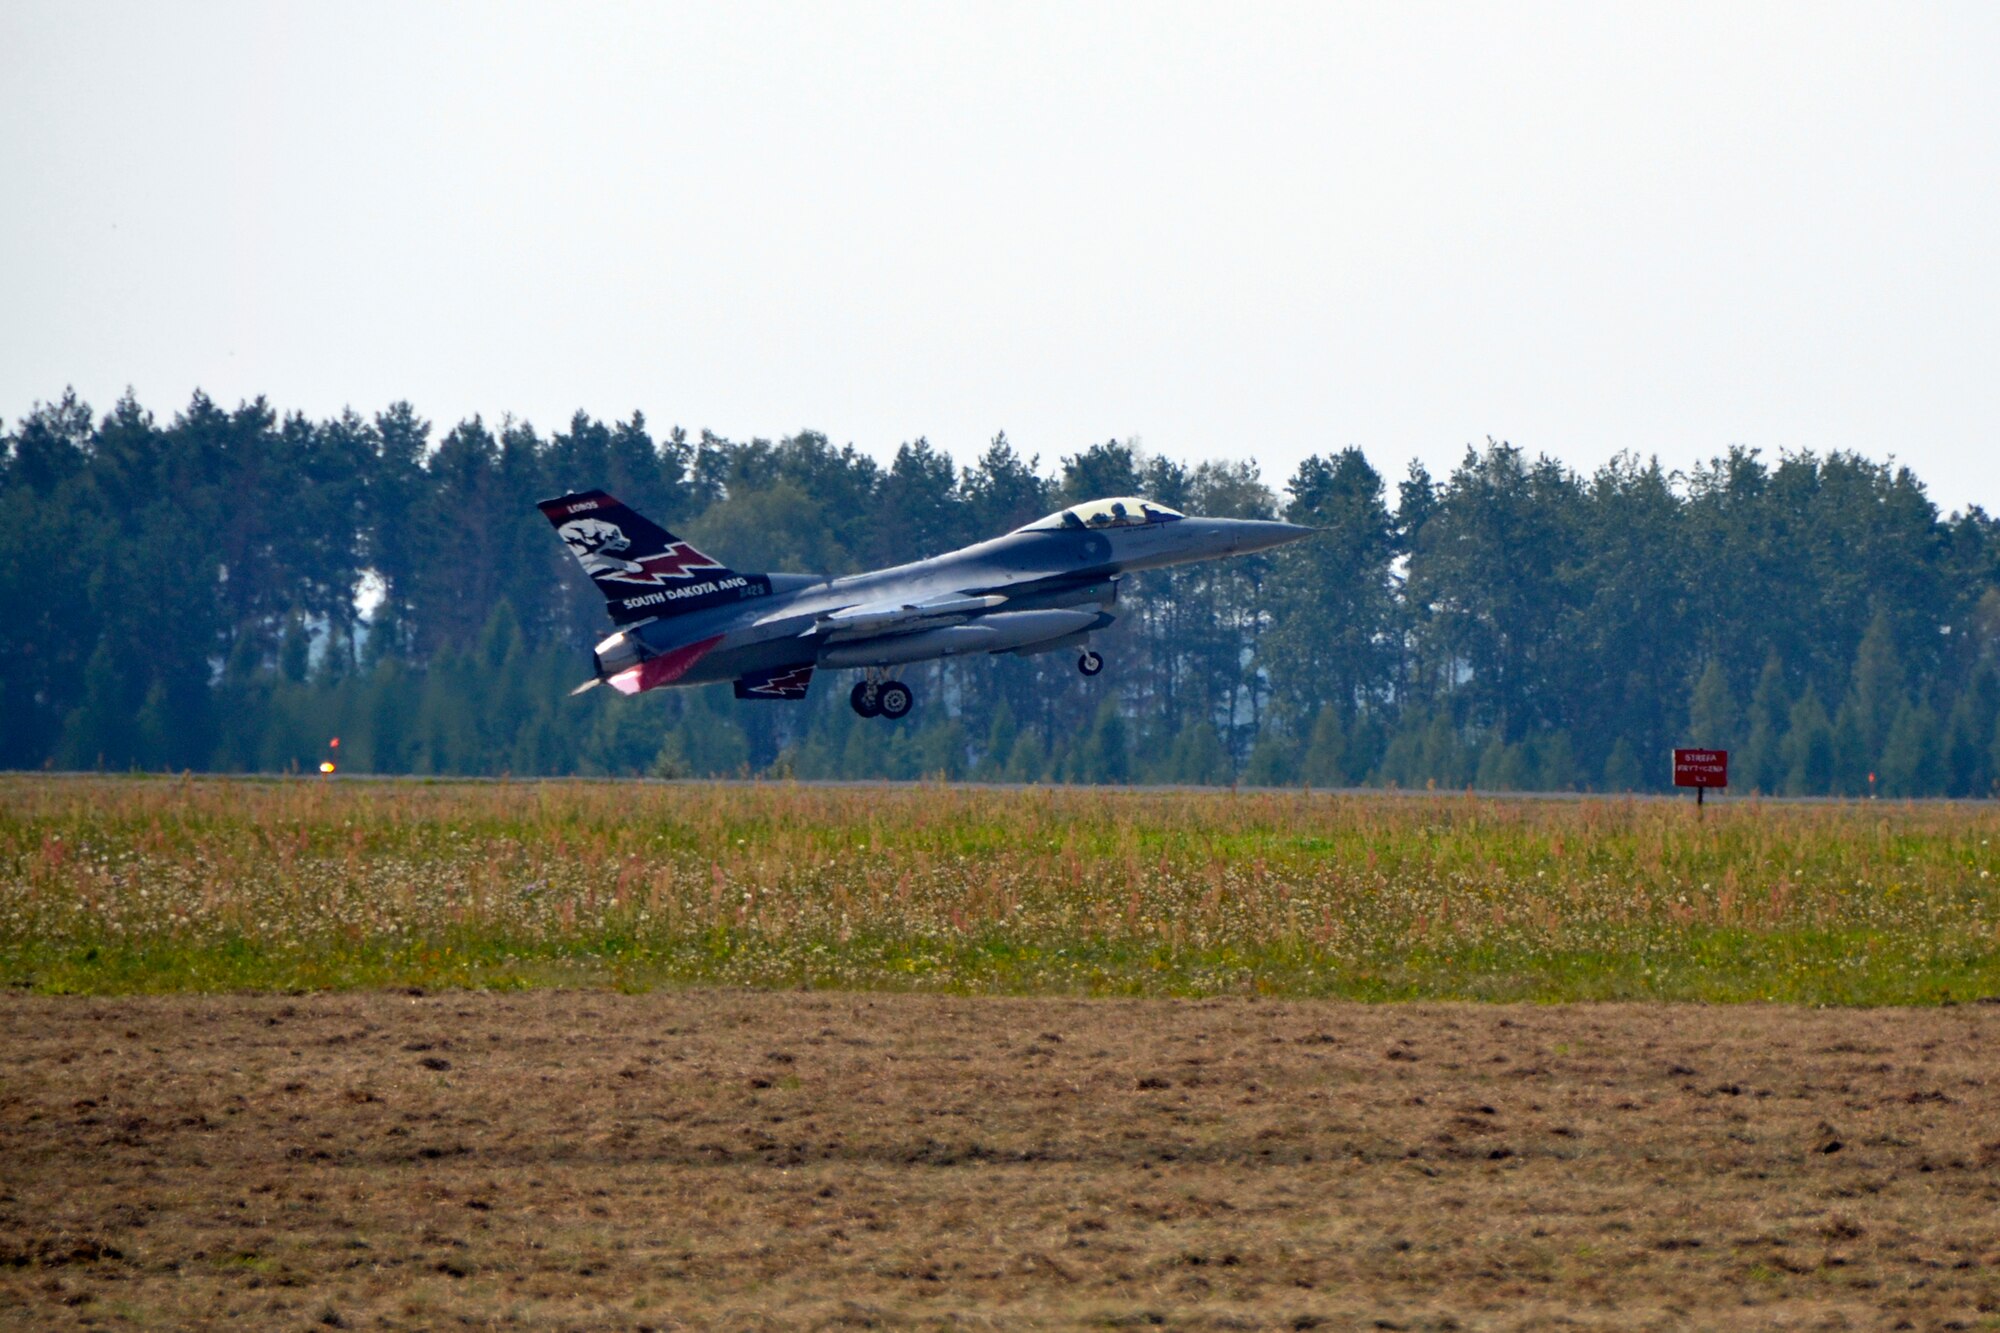 An F-16 Fighting Falcon from the South Dakota Air National Guard, 114th Fighter Wing lands at Lask Air Base, Sept. 3. More than 100 members of the unit are deployed in support of Aviation Detachment 16-4, a bilateral training exercise between the U.S. and Polish forces. (U.S. Air National Guard photo by Capt. Amy Rittberger/Released)